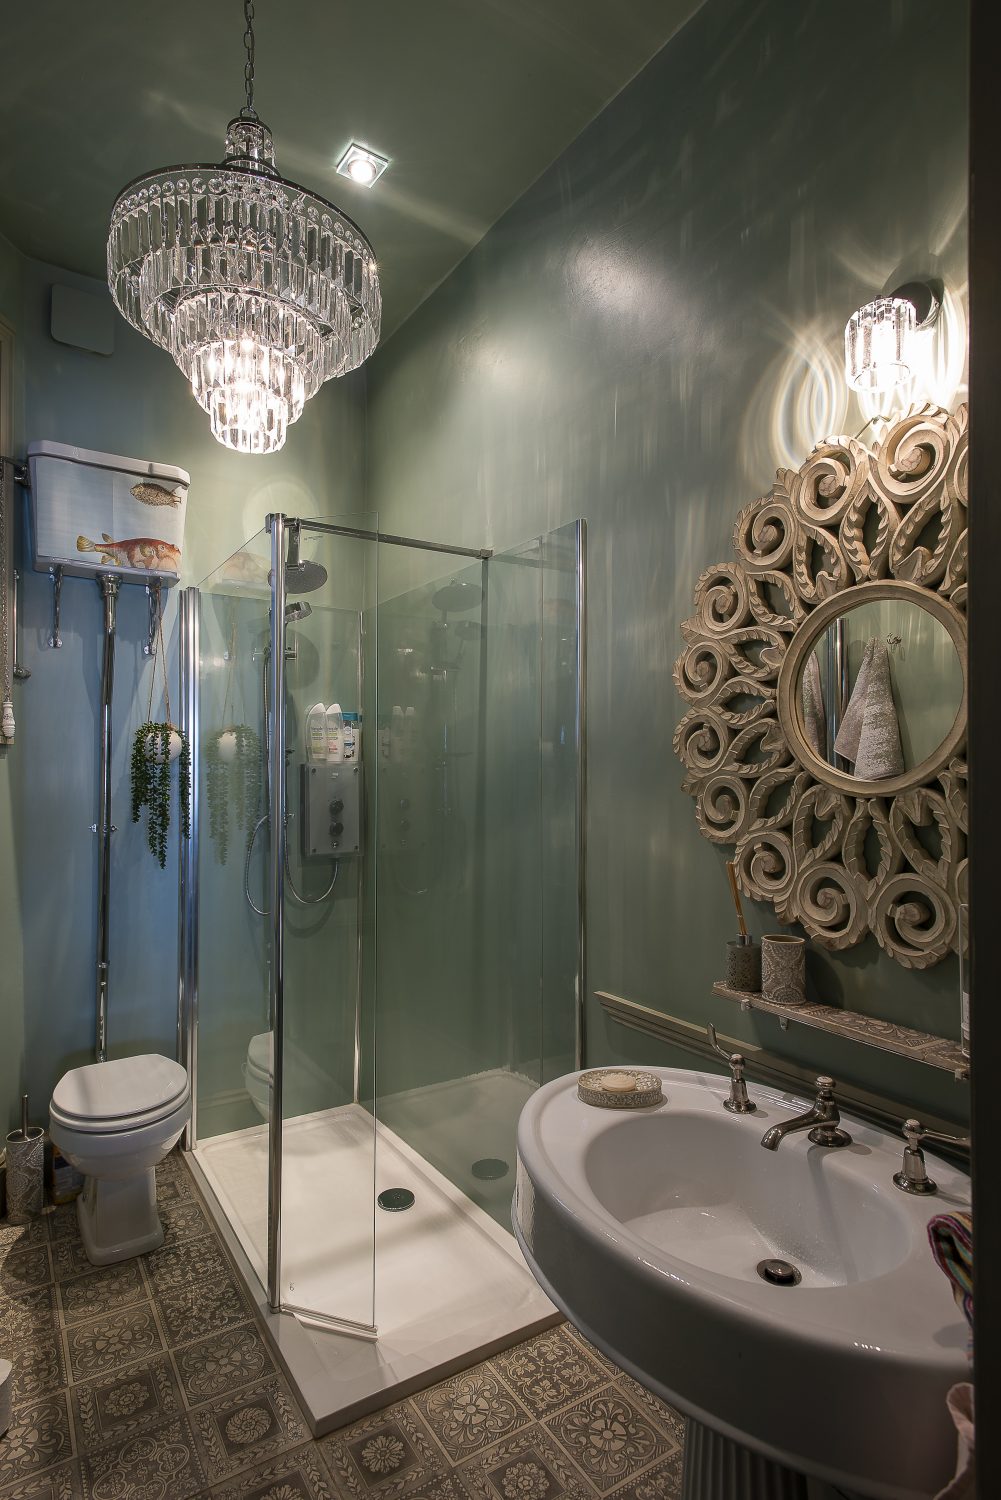 A chandelier from nationallighting.co.uk illuminates the sage green shower room, complete with an ornate pedestal basin